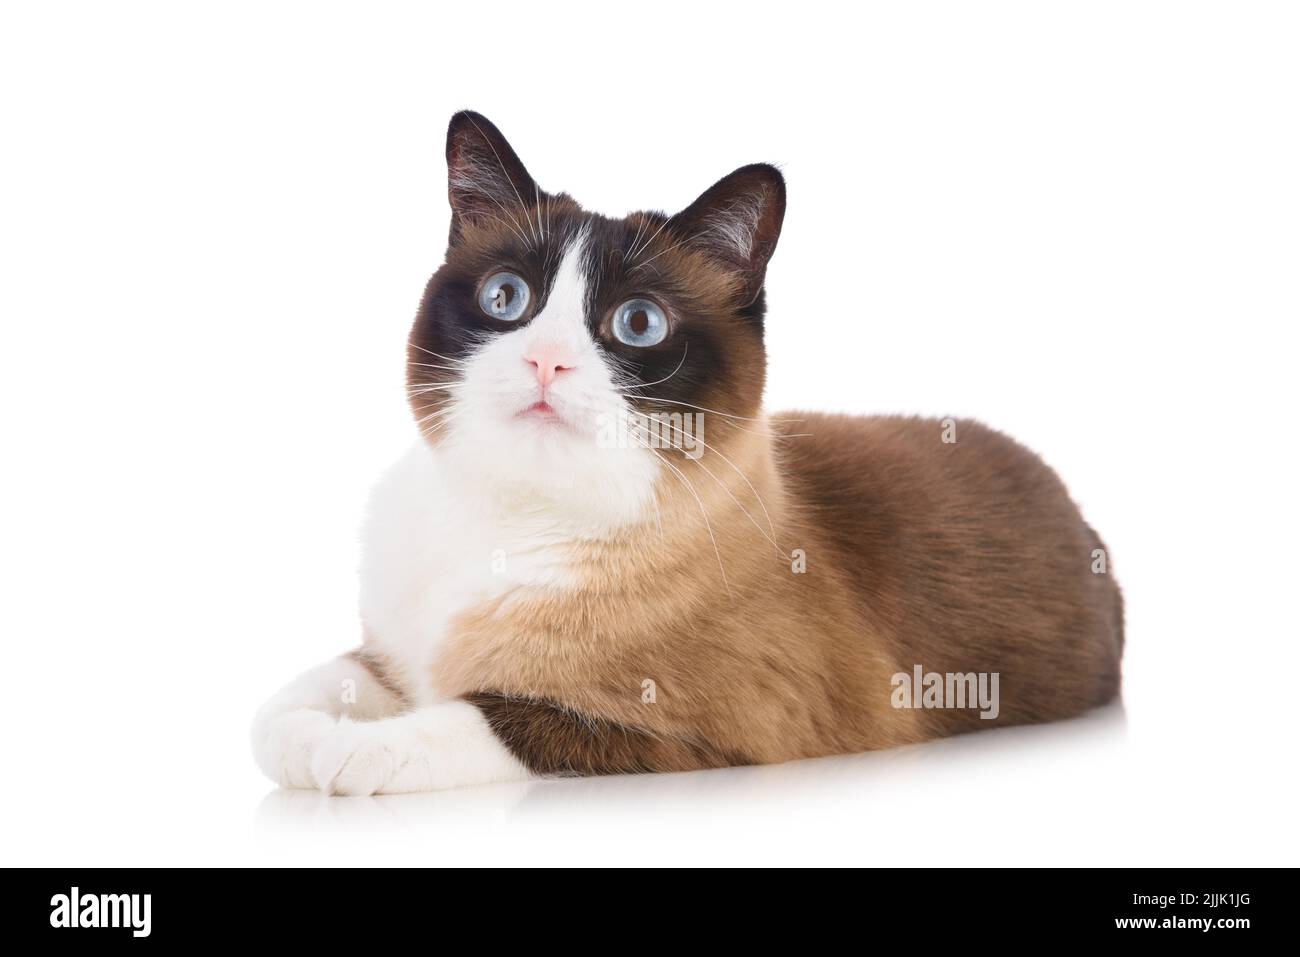 Curious snowshoe cat lying on white background isolated and looking up Stock Photo